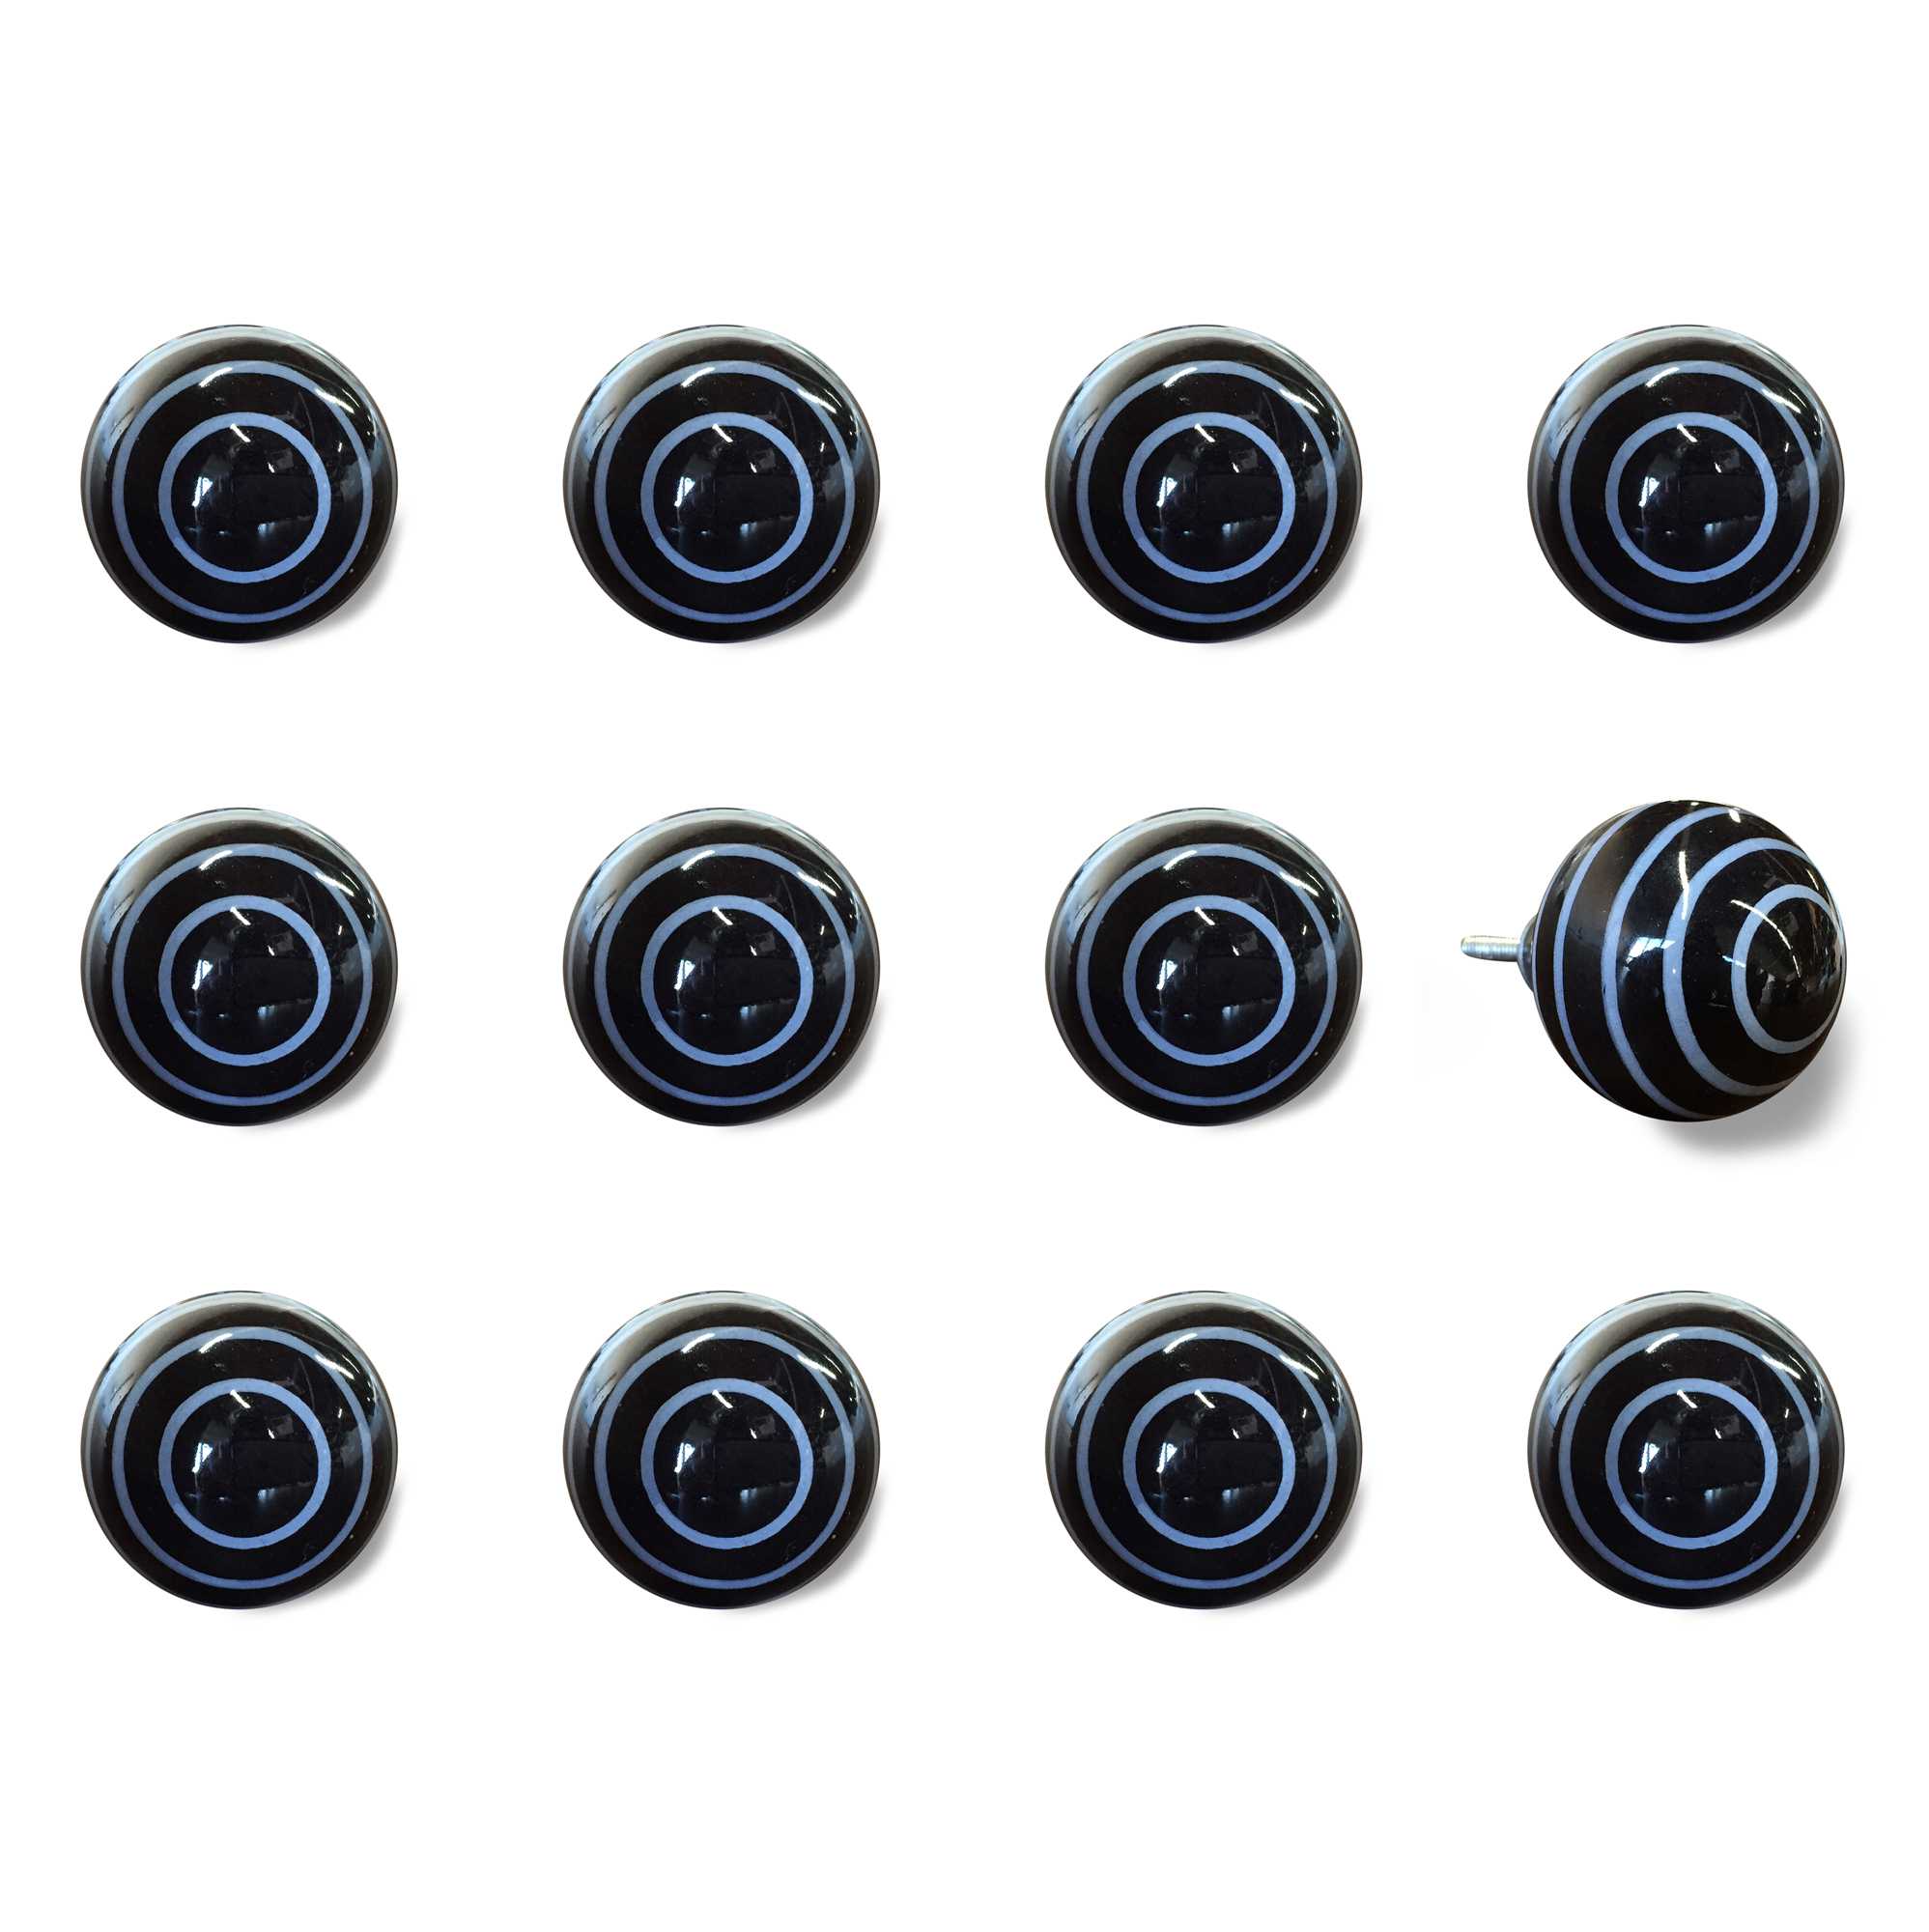 1.5" x 1.5" x 1.5" Black and Light Blue- Knobs 12-Pack